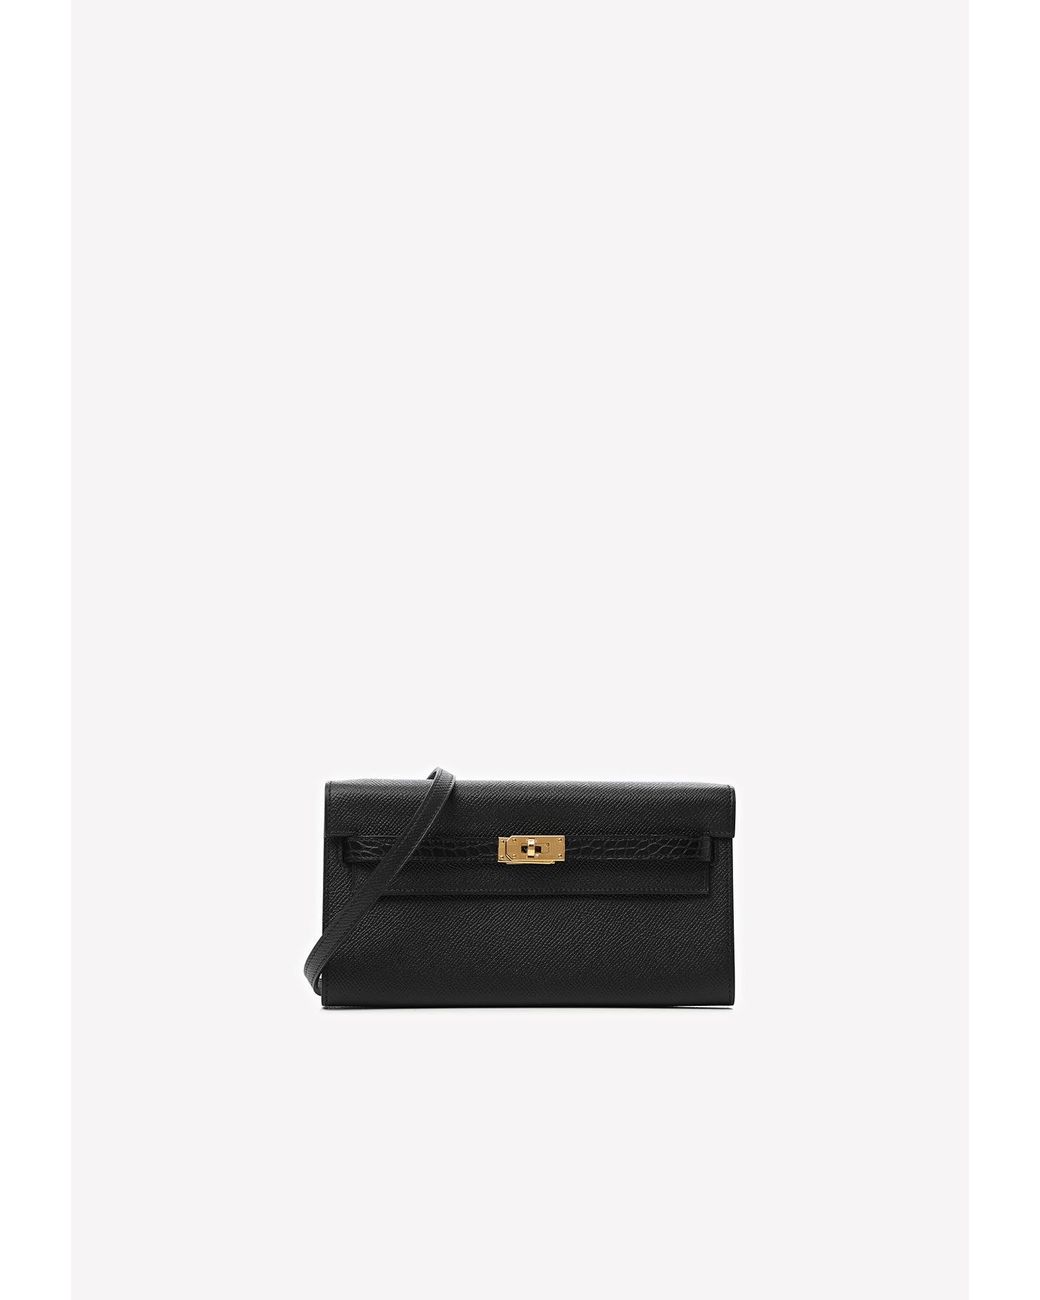 HERMES Kelly HERMES Kelly wallet touch GOLD/GHW